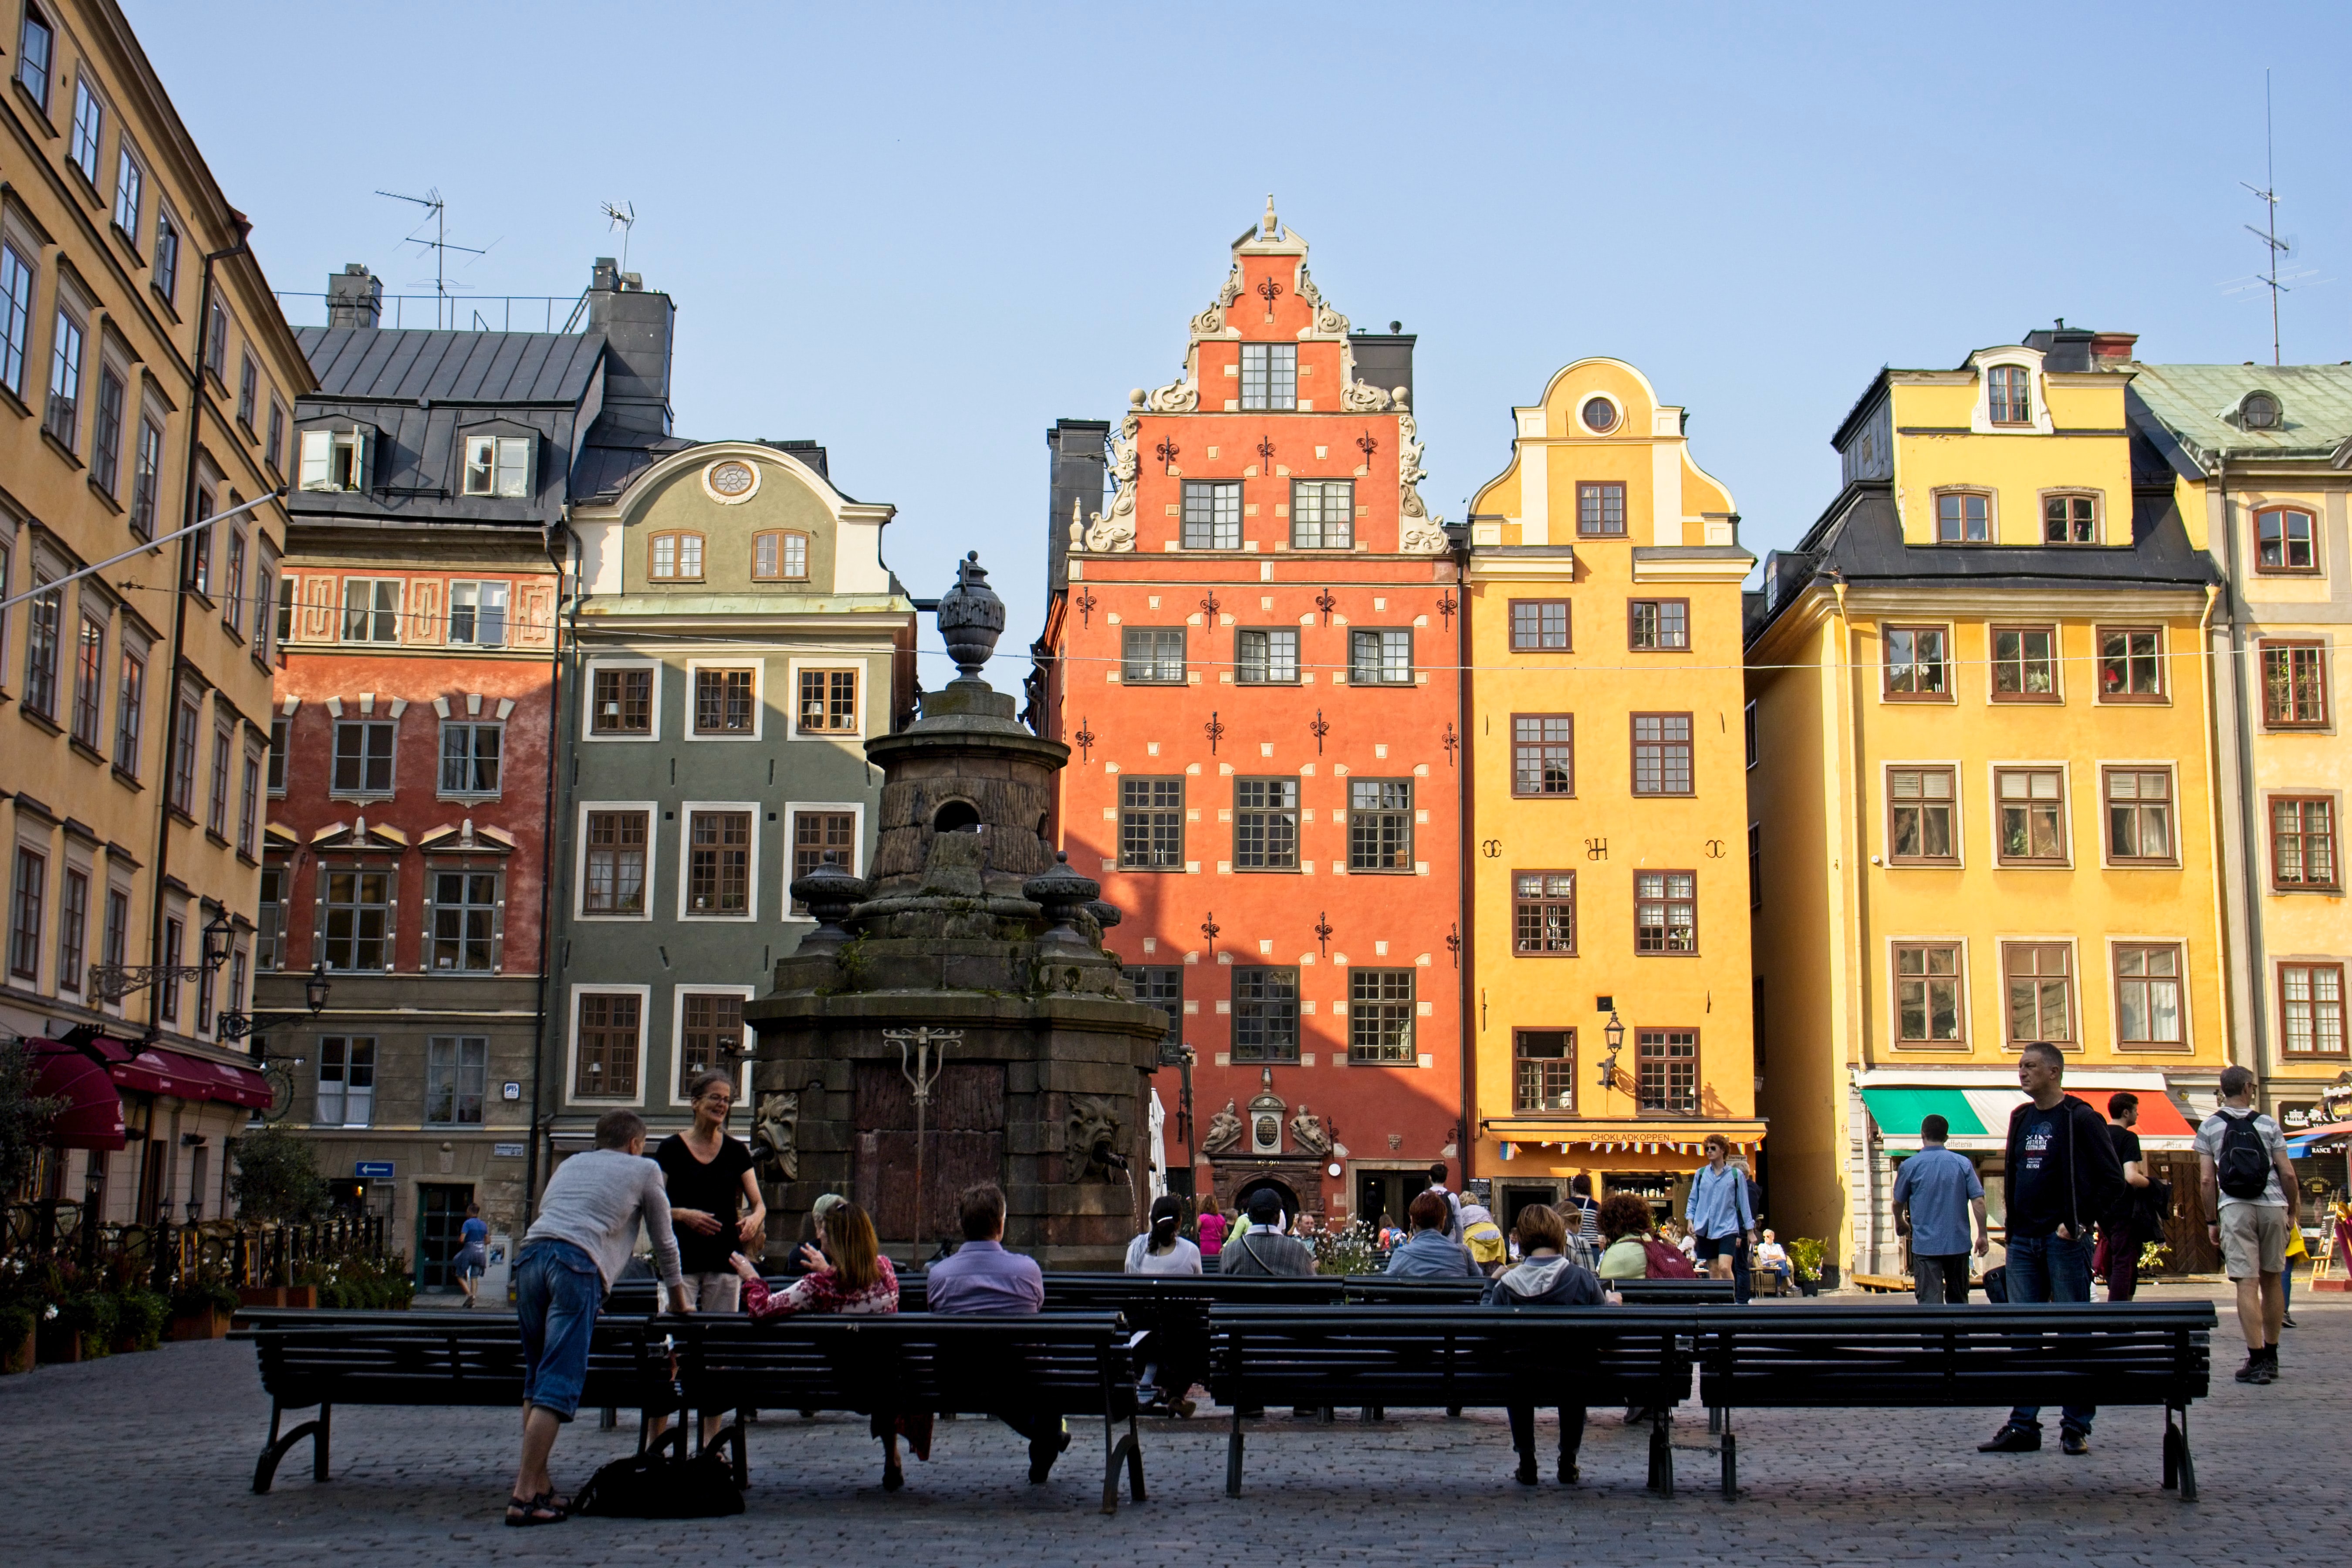 A shot of  Gamla Stan, Stockholm with different colored buildings and people sitting on park benches